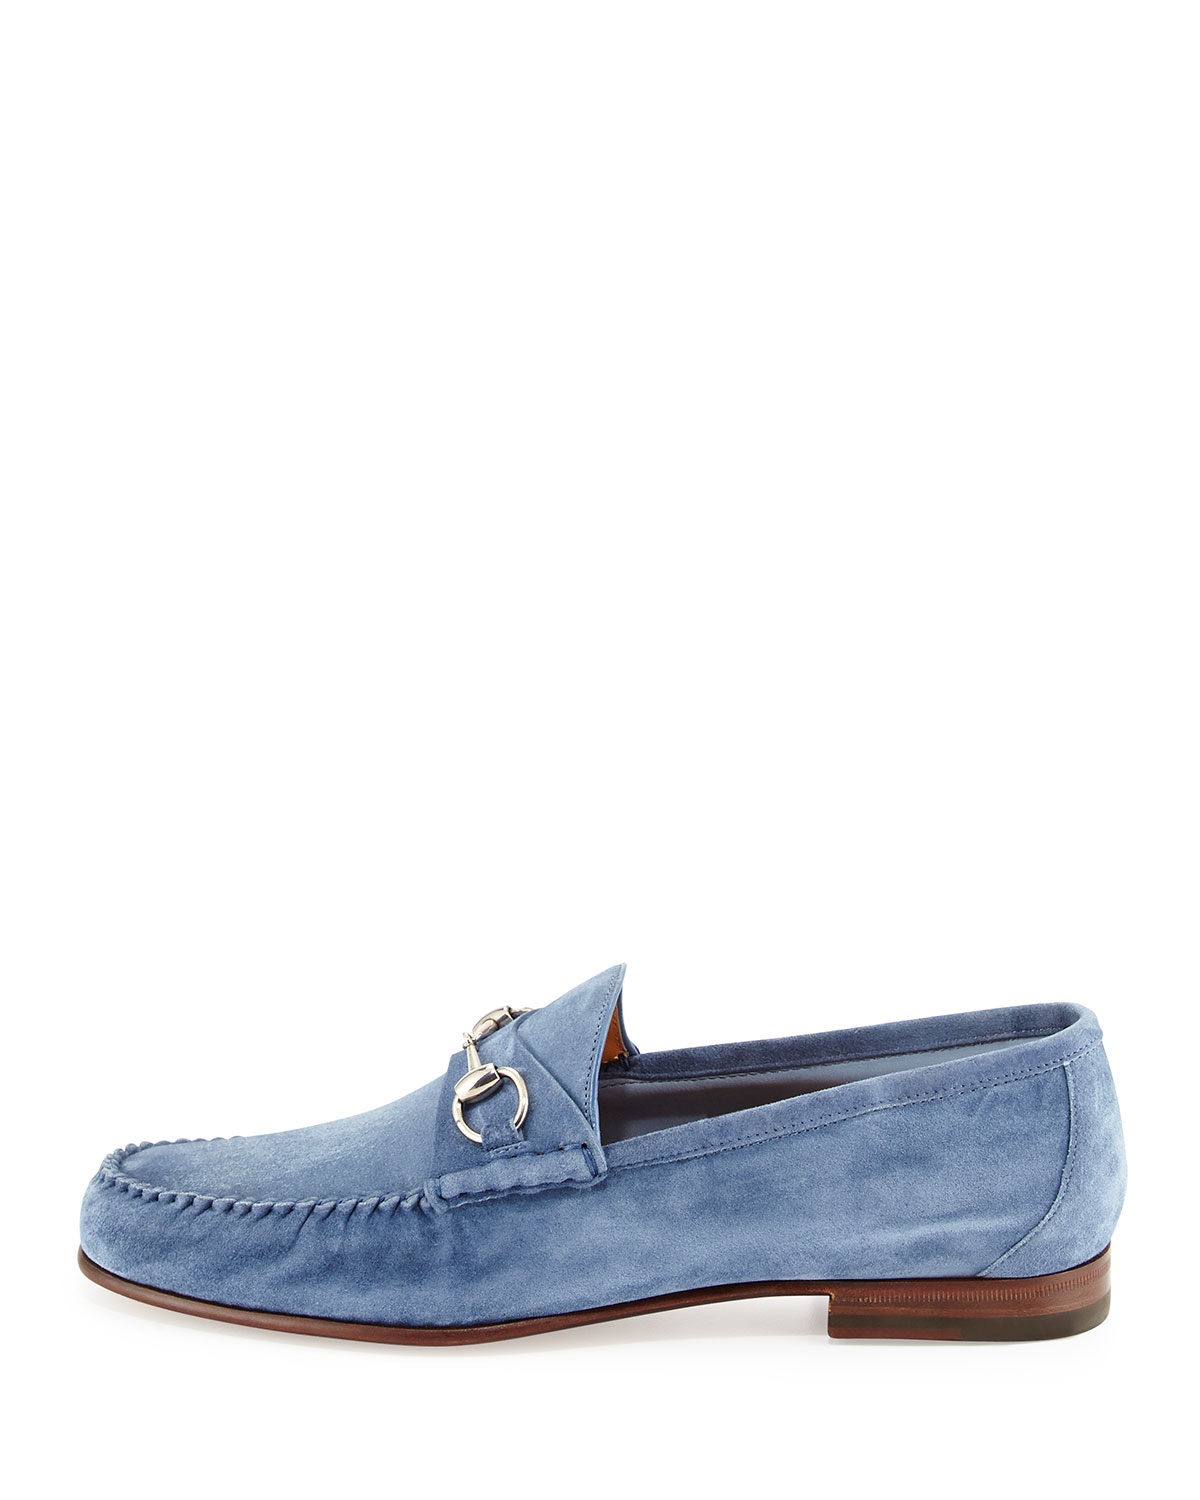 Lyst - Gucci Unlined Suede Horsebit Loafer in Blue for Men